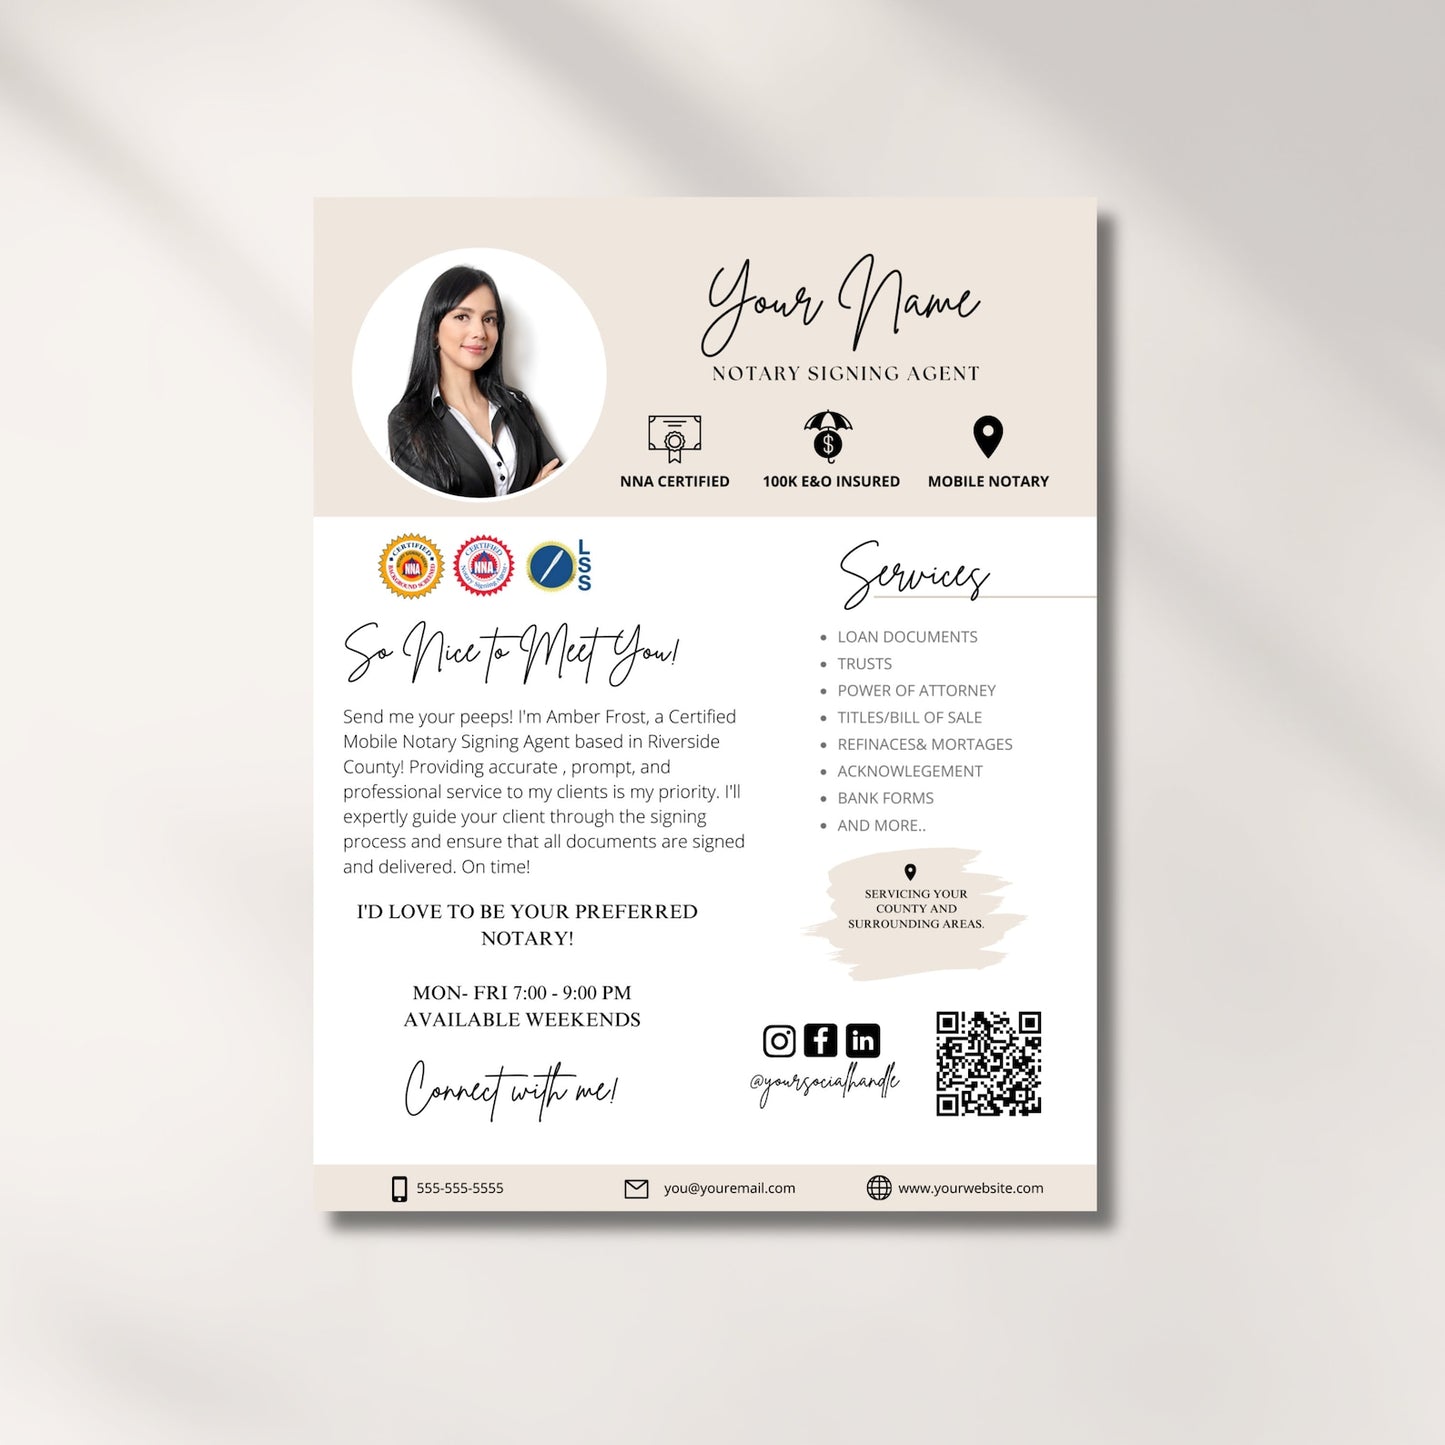 Notary Intro Flyer, Notary Marketing Flyer Template, Loan Signing Agent, Notary Flyer Design, Notary Intro Flyer, Notary